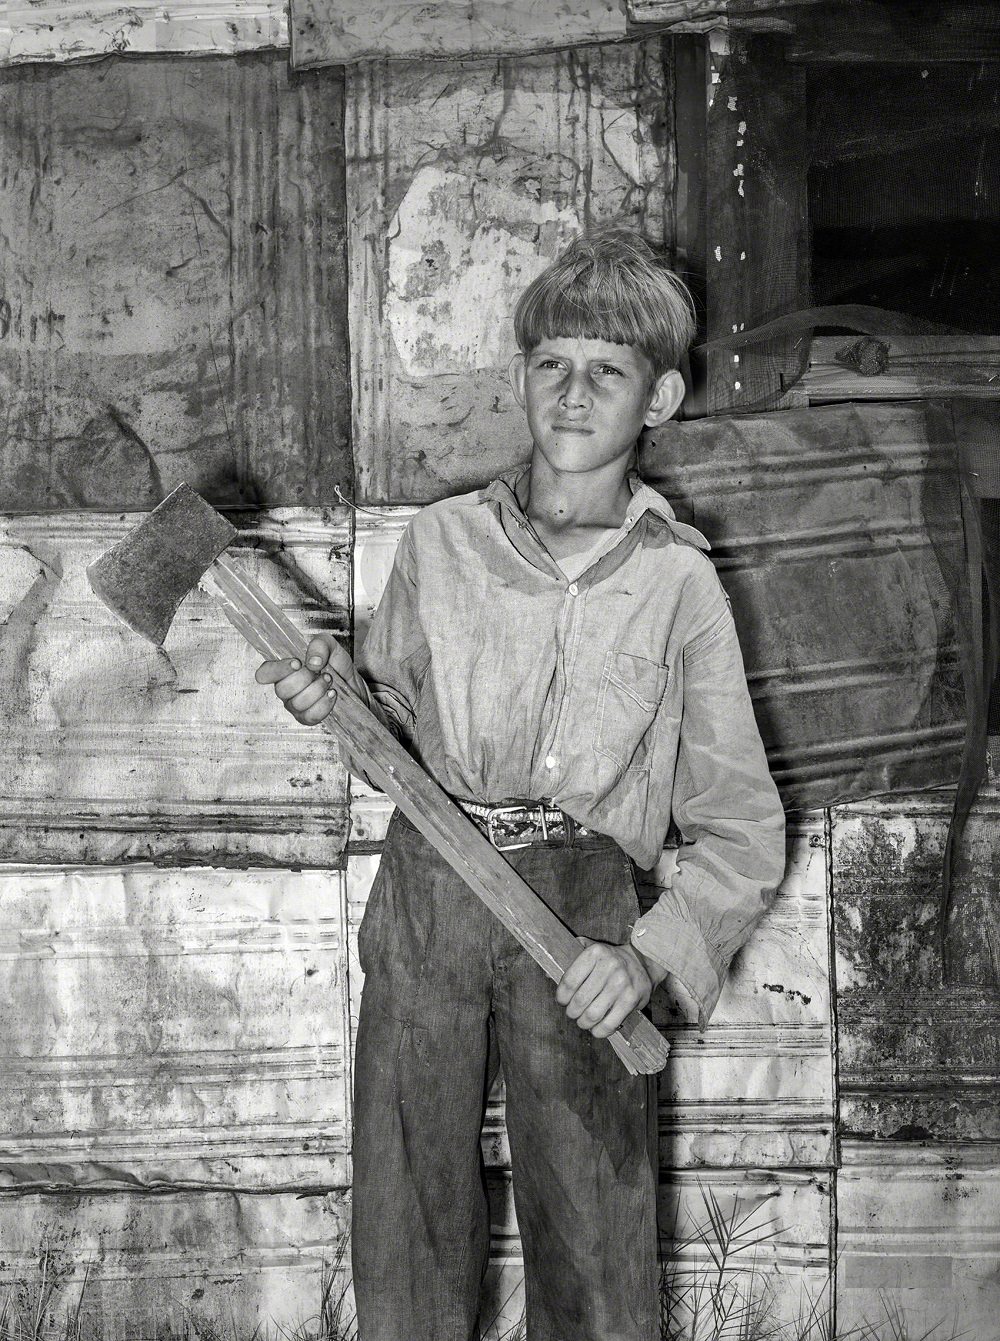 Boy living in May Avenue camp with homemade ax, Oklahoma City, July 1939